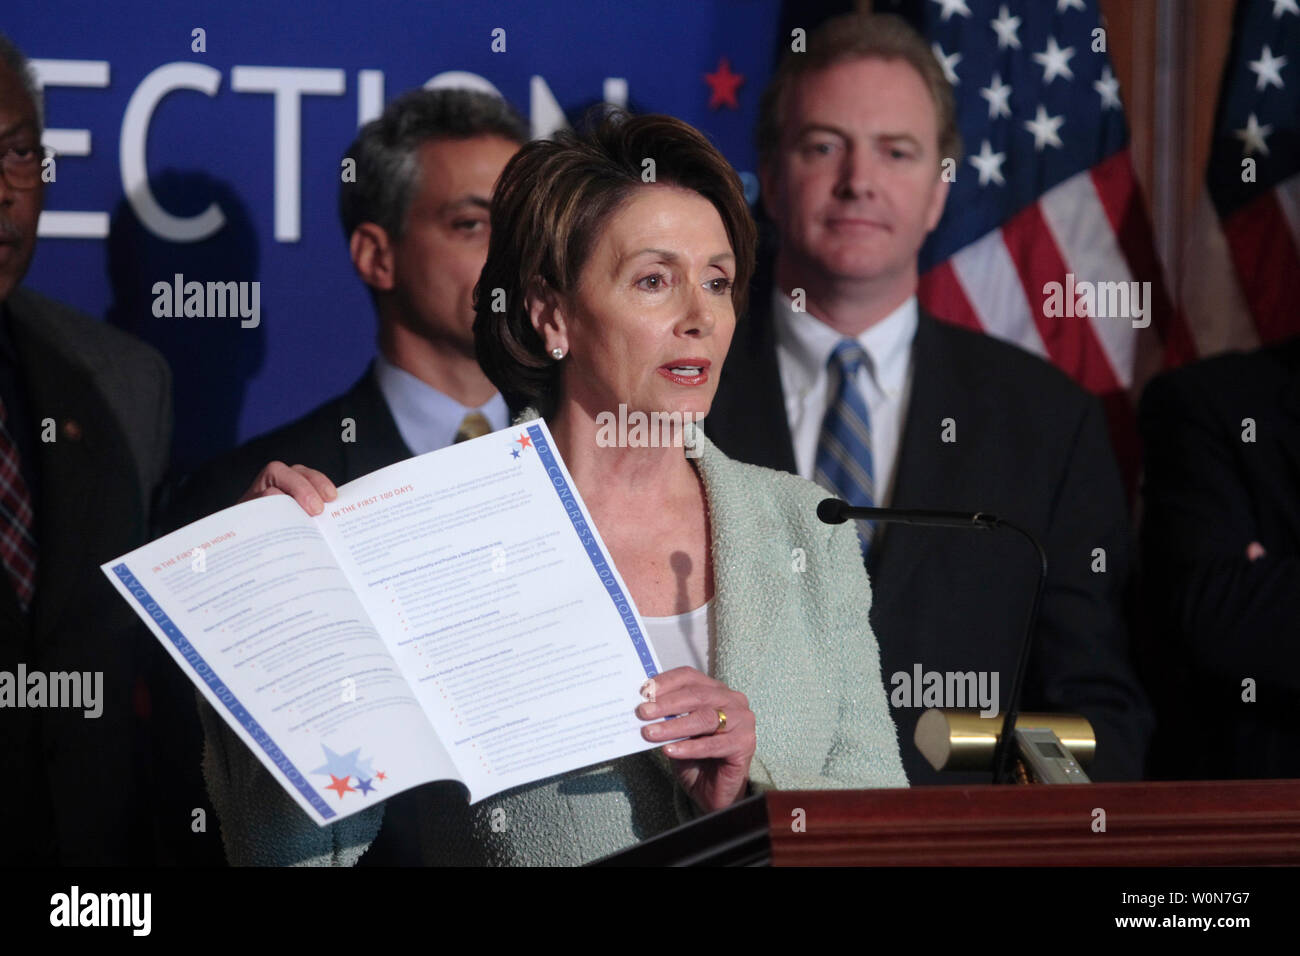 House Speaker Nancy Pelosi (D-CA) (R) flanked by Rahm Emanuel (D-IL)(L), and Chris Van Hollen (D-MD) speaks to reporters marking first 100 days of Democrat run Congress on Capitol Hill in Washington, March 28, 2007. (UPI Photo/ Kamenko Pajic) Stock Photo